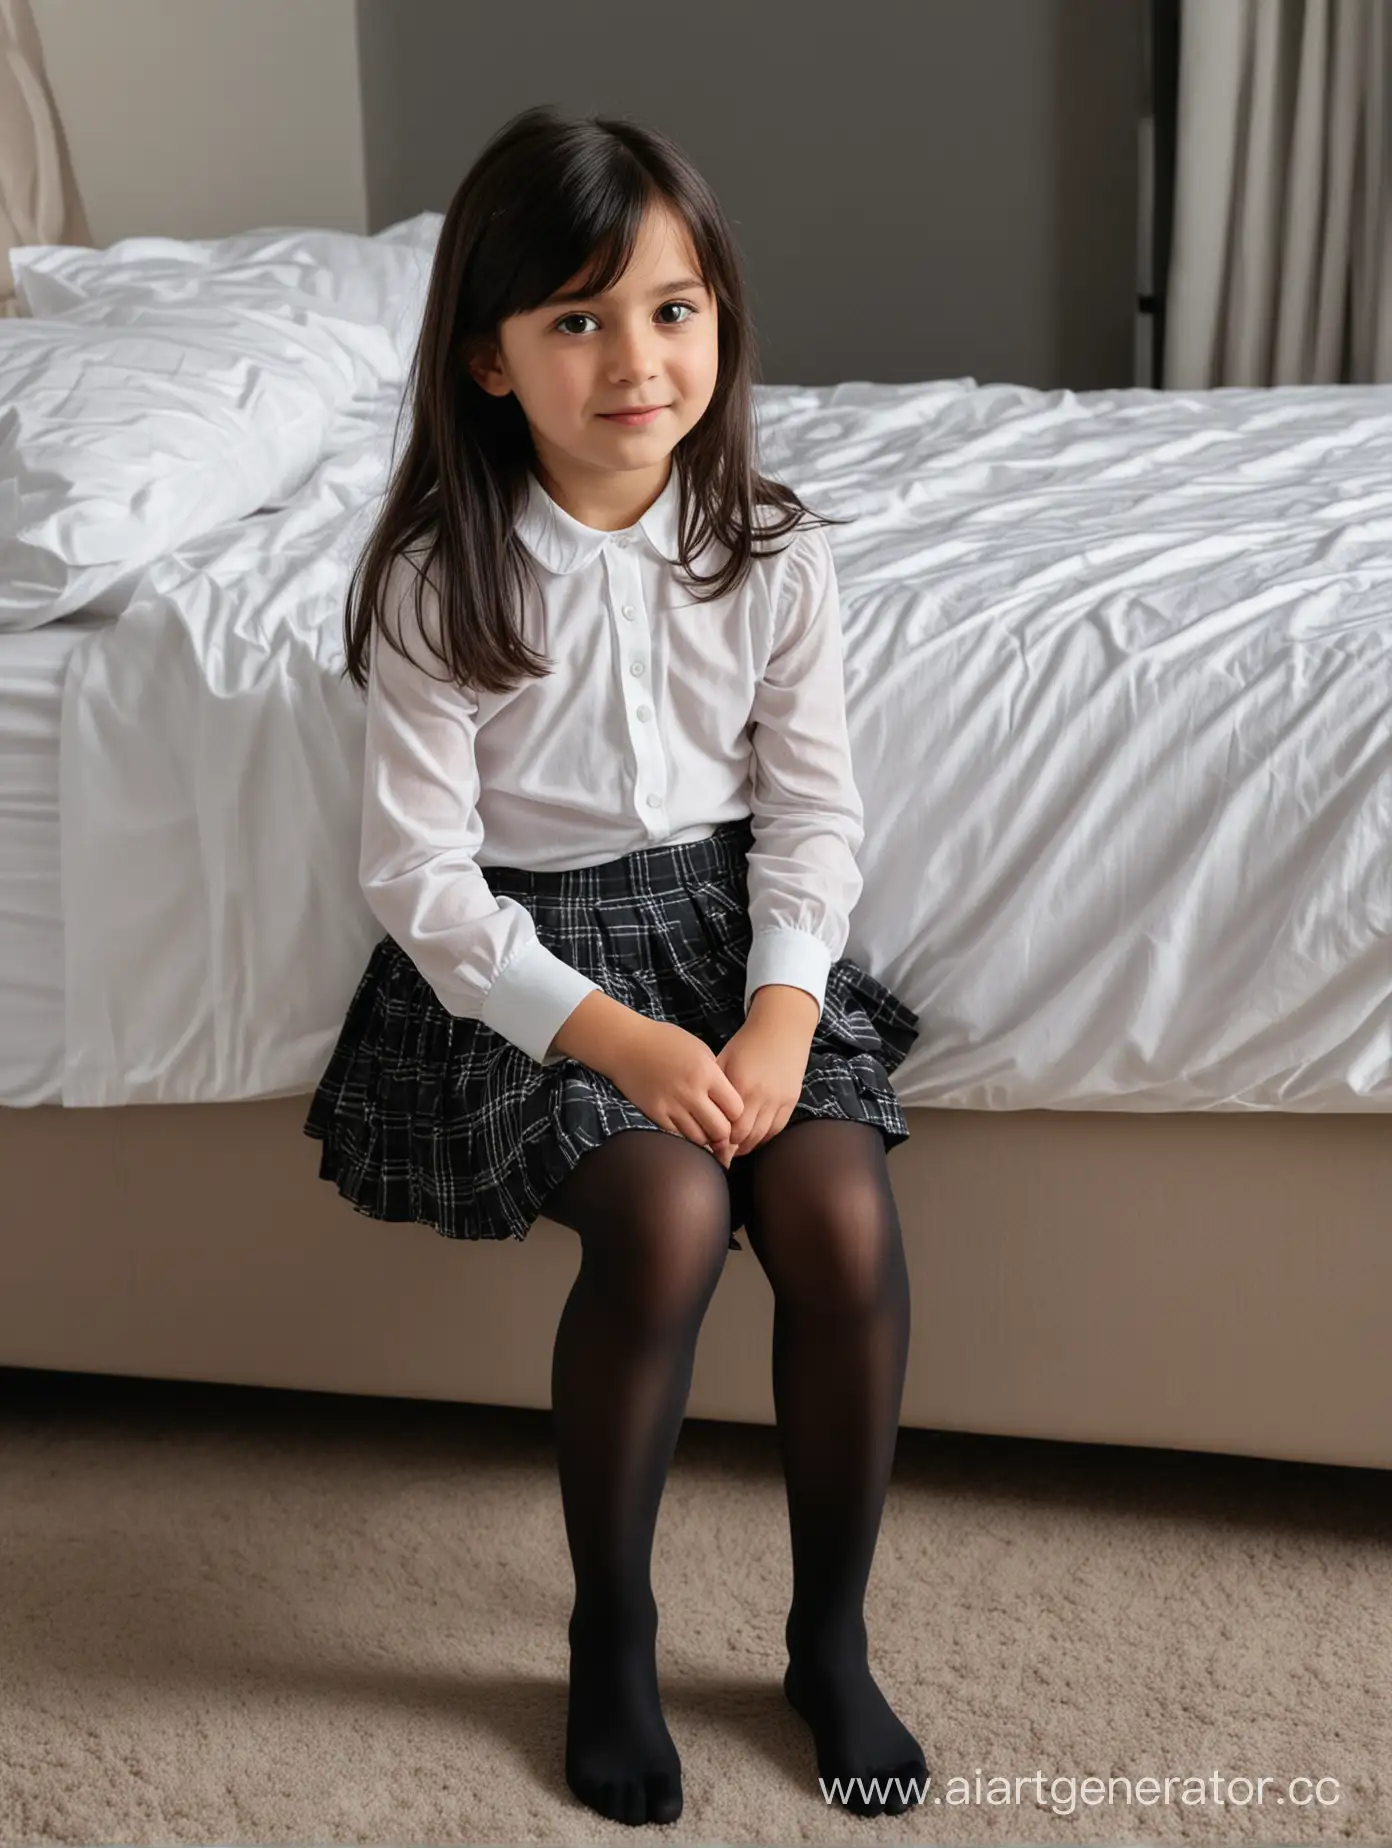 Young-Turkish-Girl-in-Patterned-Skirt-and-Opaque-Pantyhose-Sitting-on-Bedroom-Floor